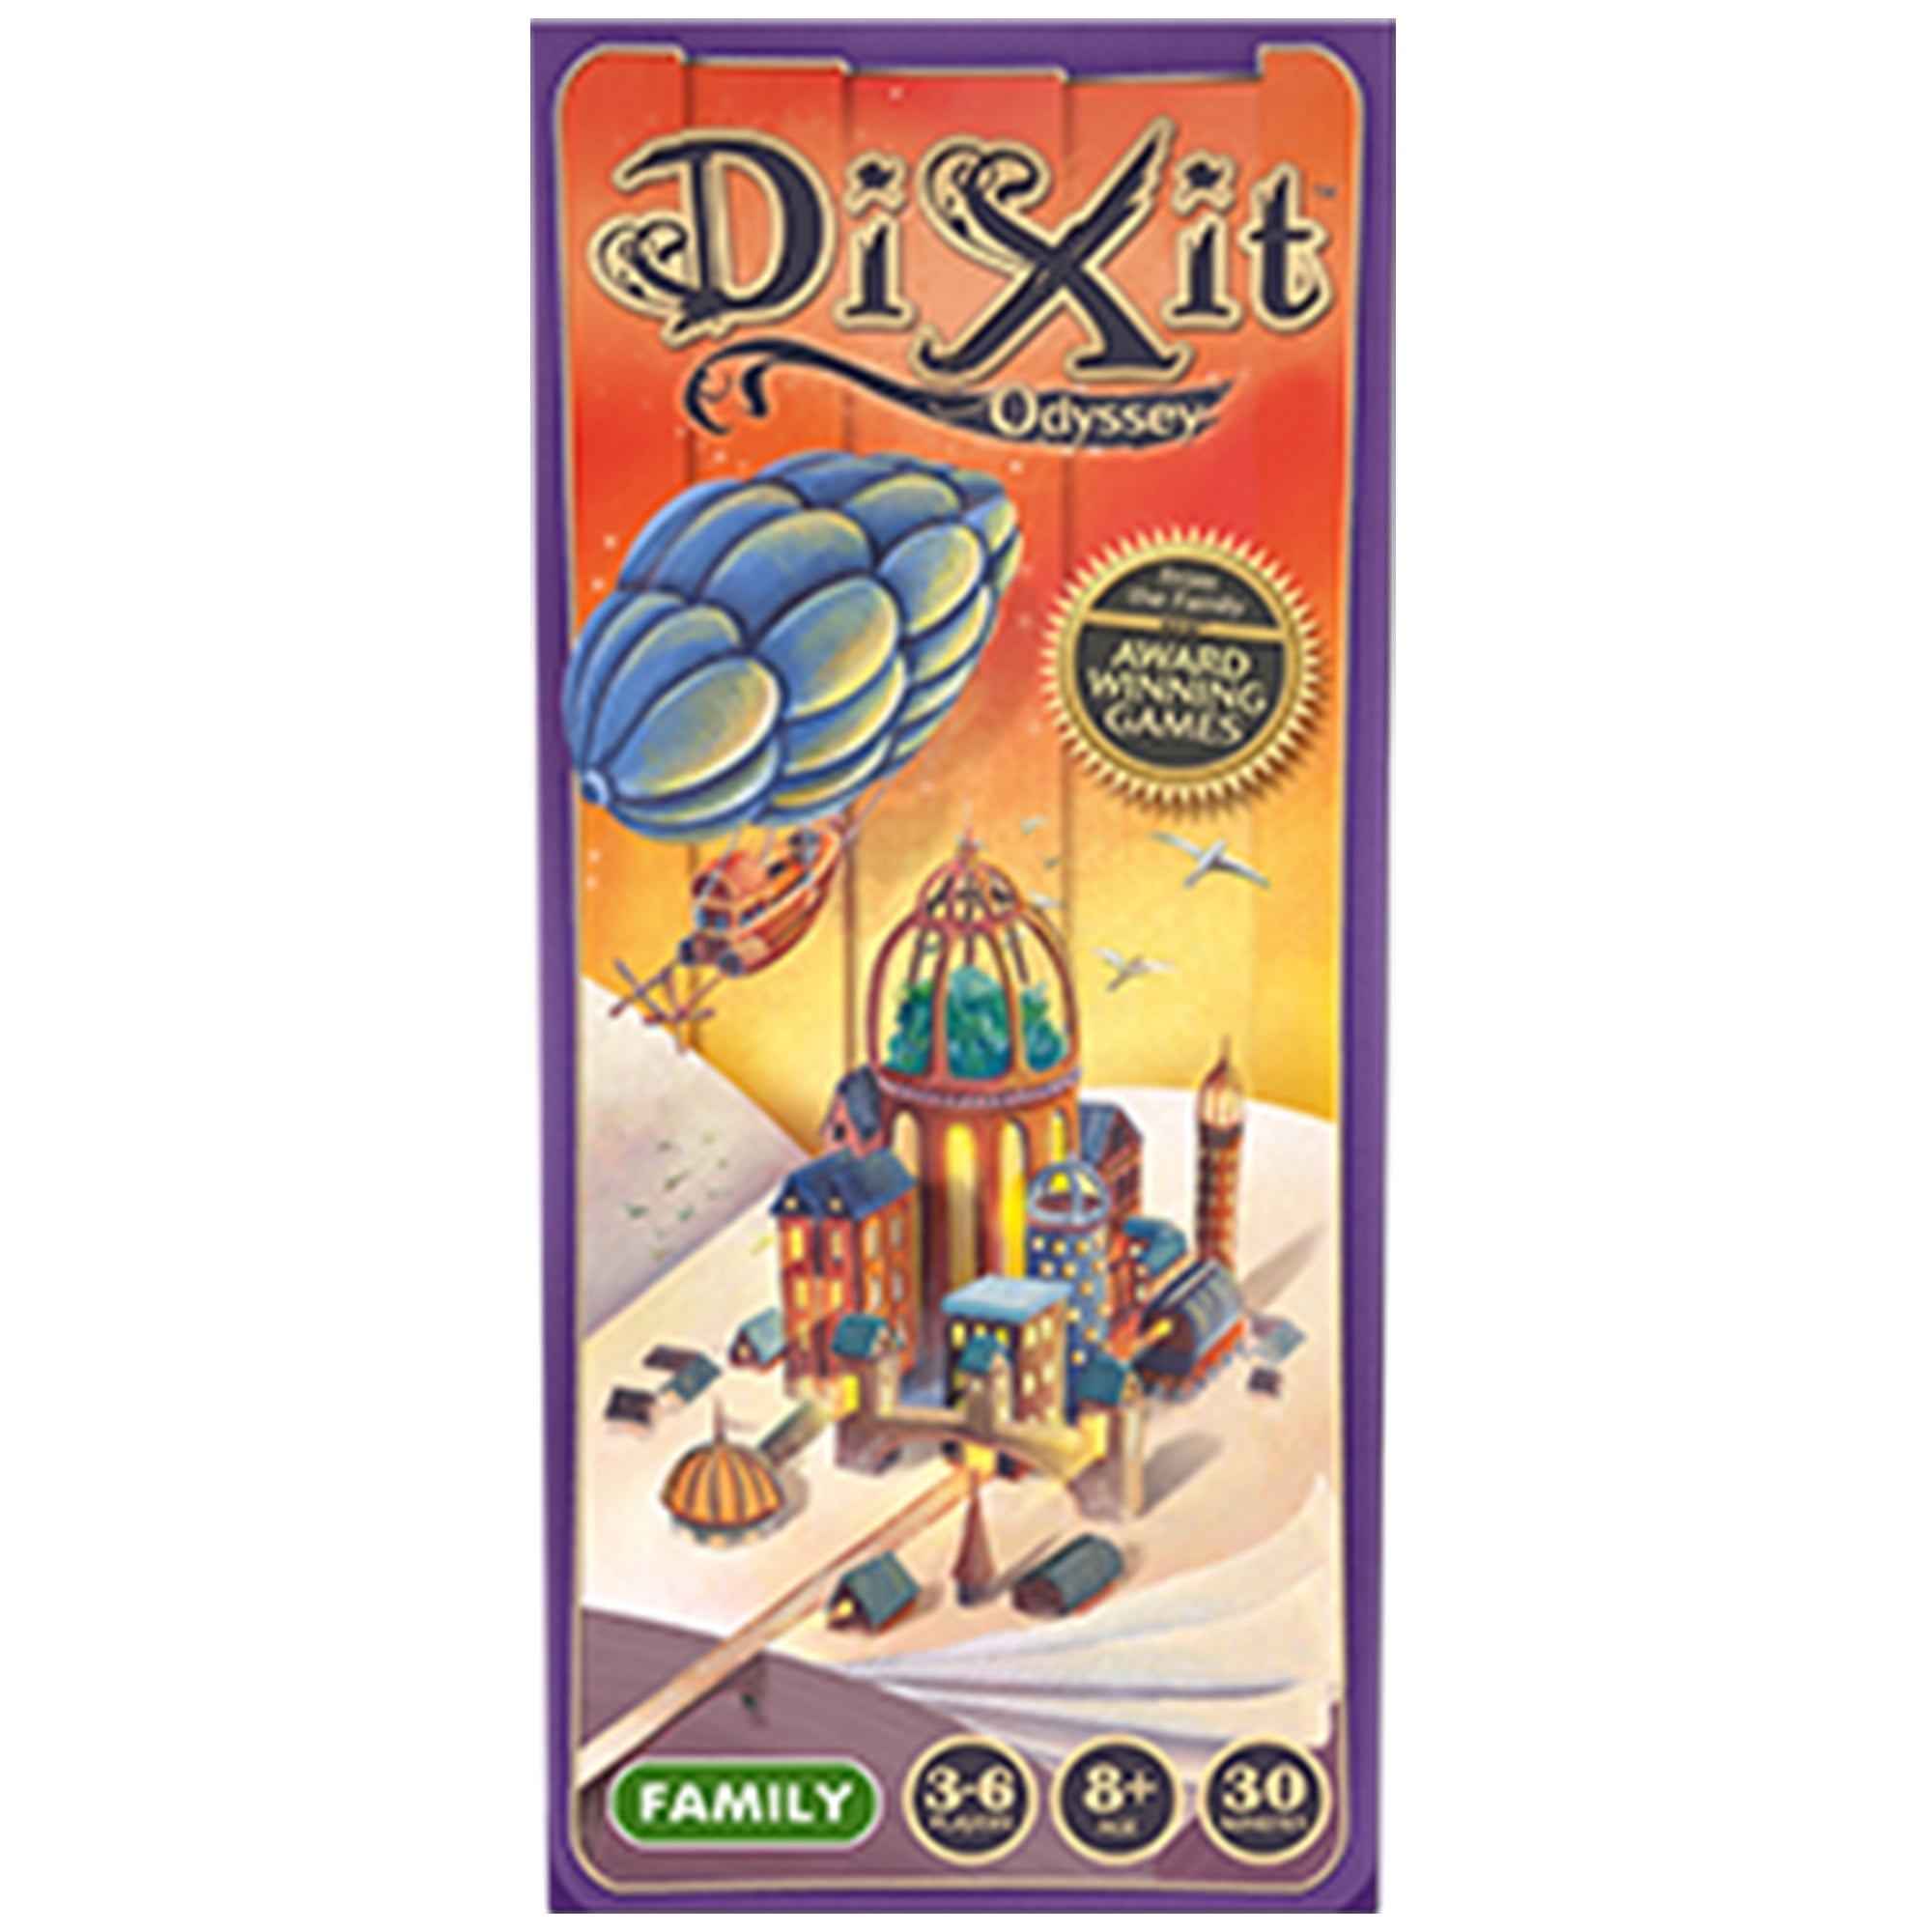 NEW Dixit Odyssey Card Game 